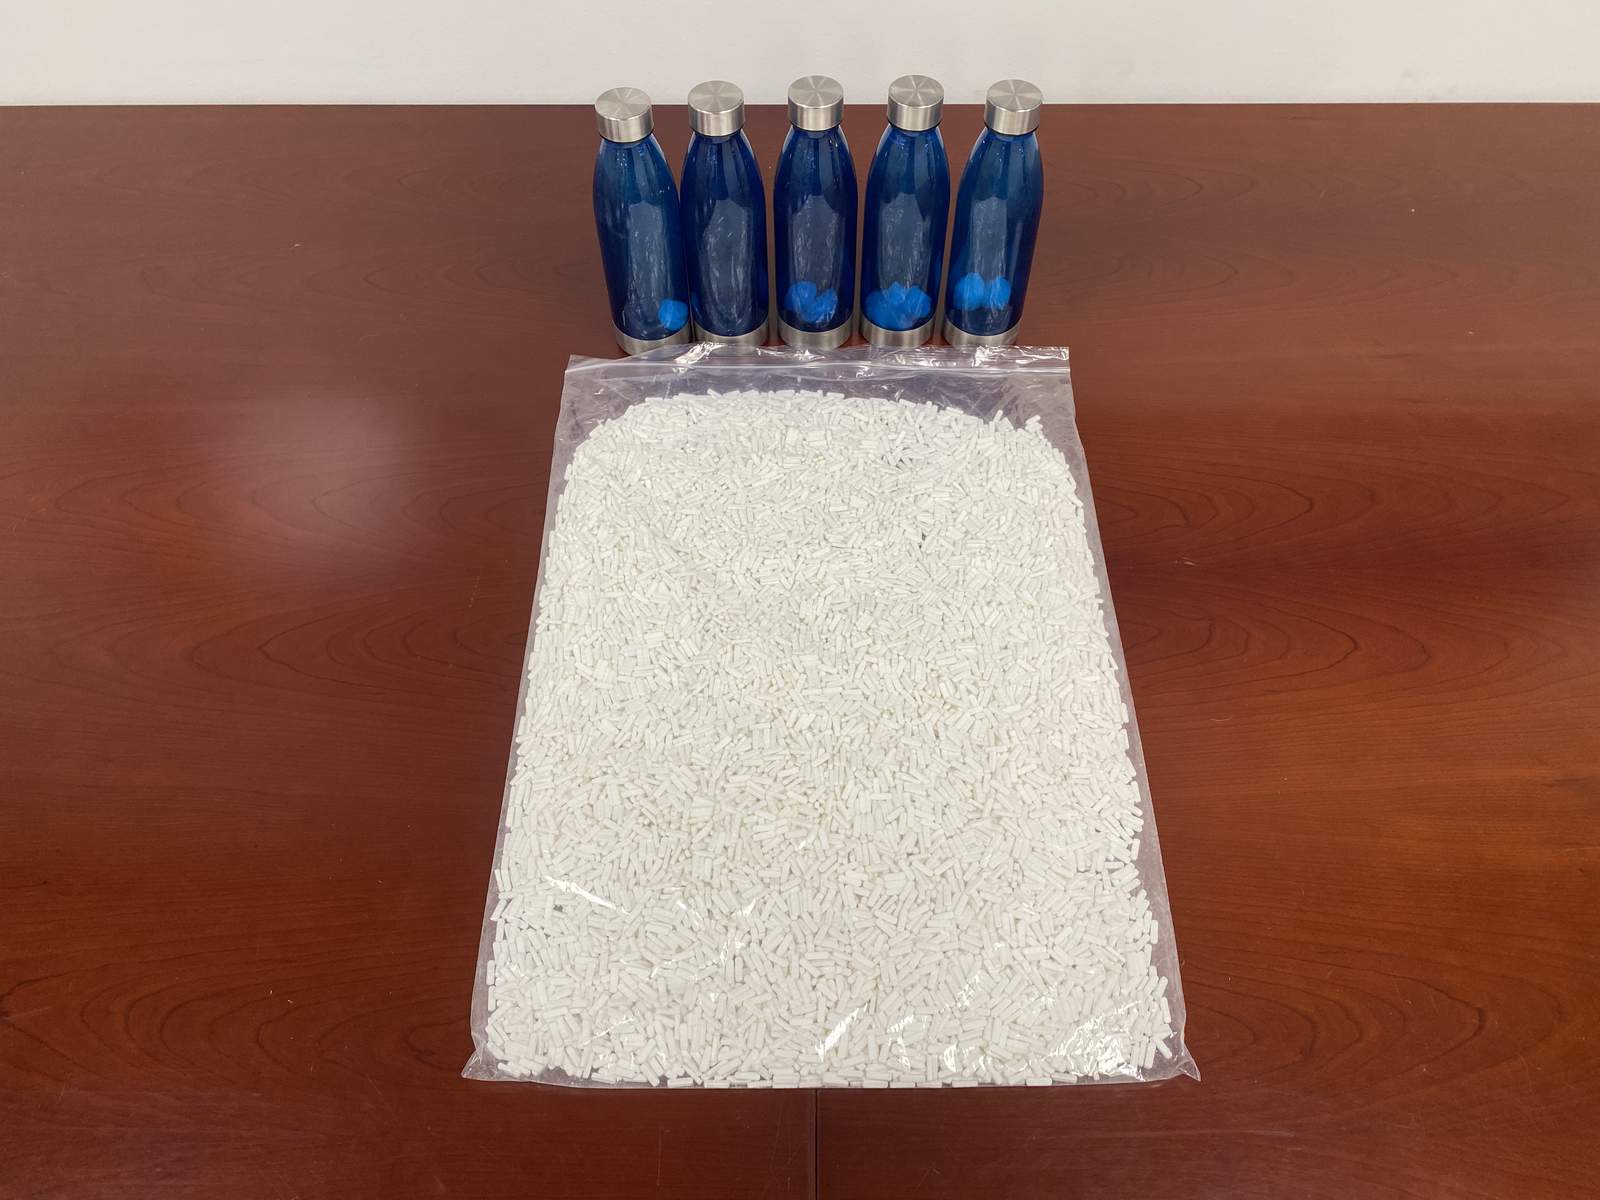 Over 10,000 pills containing Fentanyl seized during traffic stop in Fort Bend County